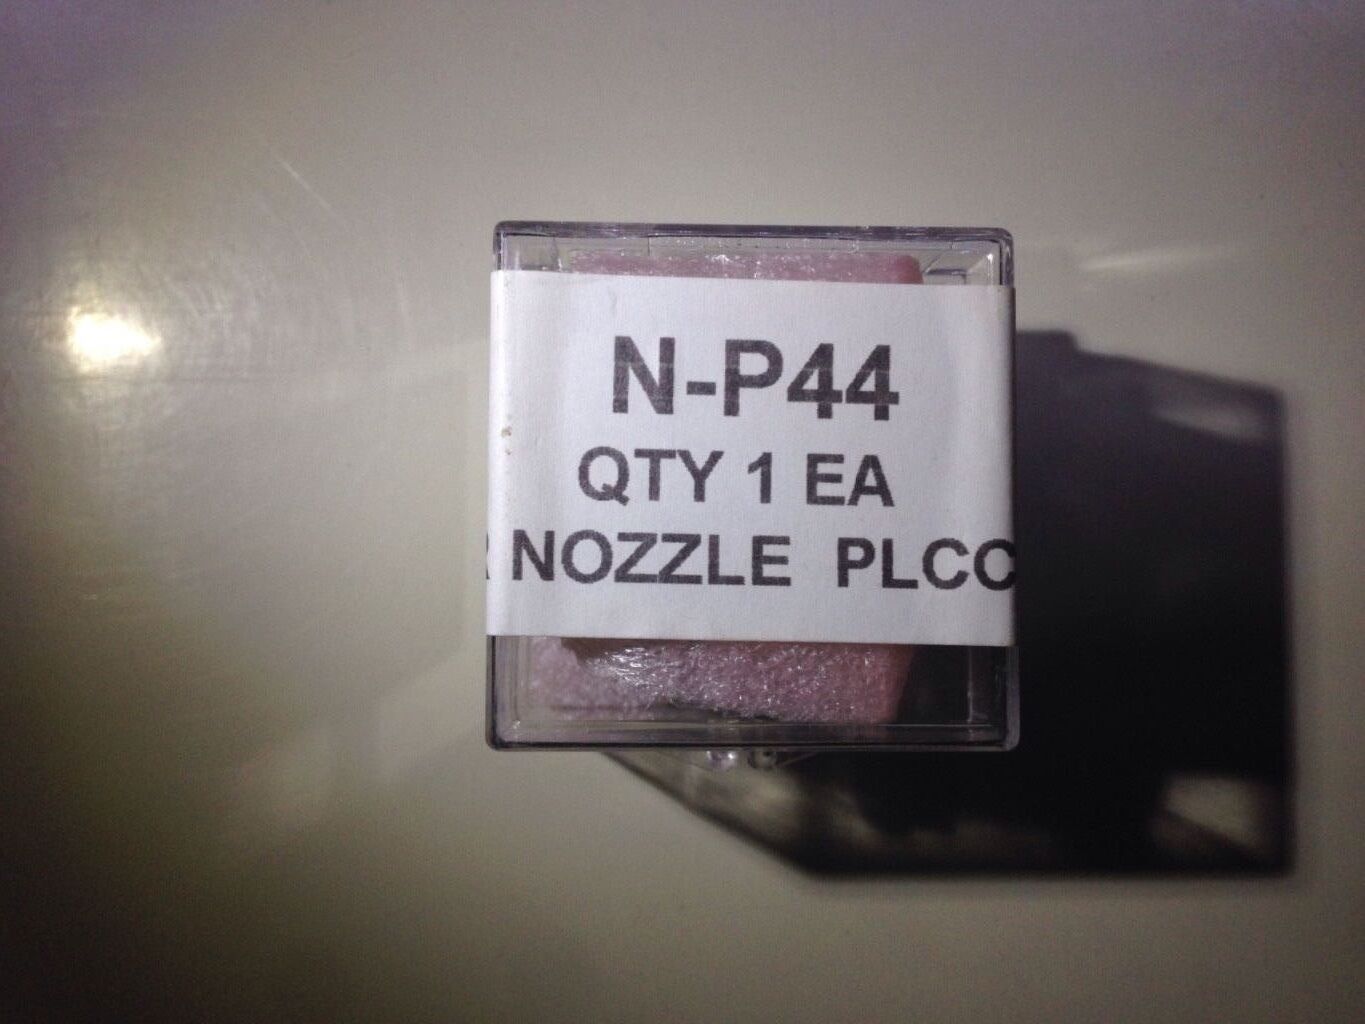 Metcal NP44 PLCC44 NoZZLE oK (NP44) used Hot Air Nozzle